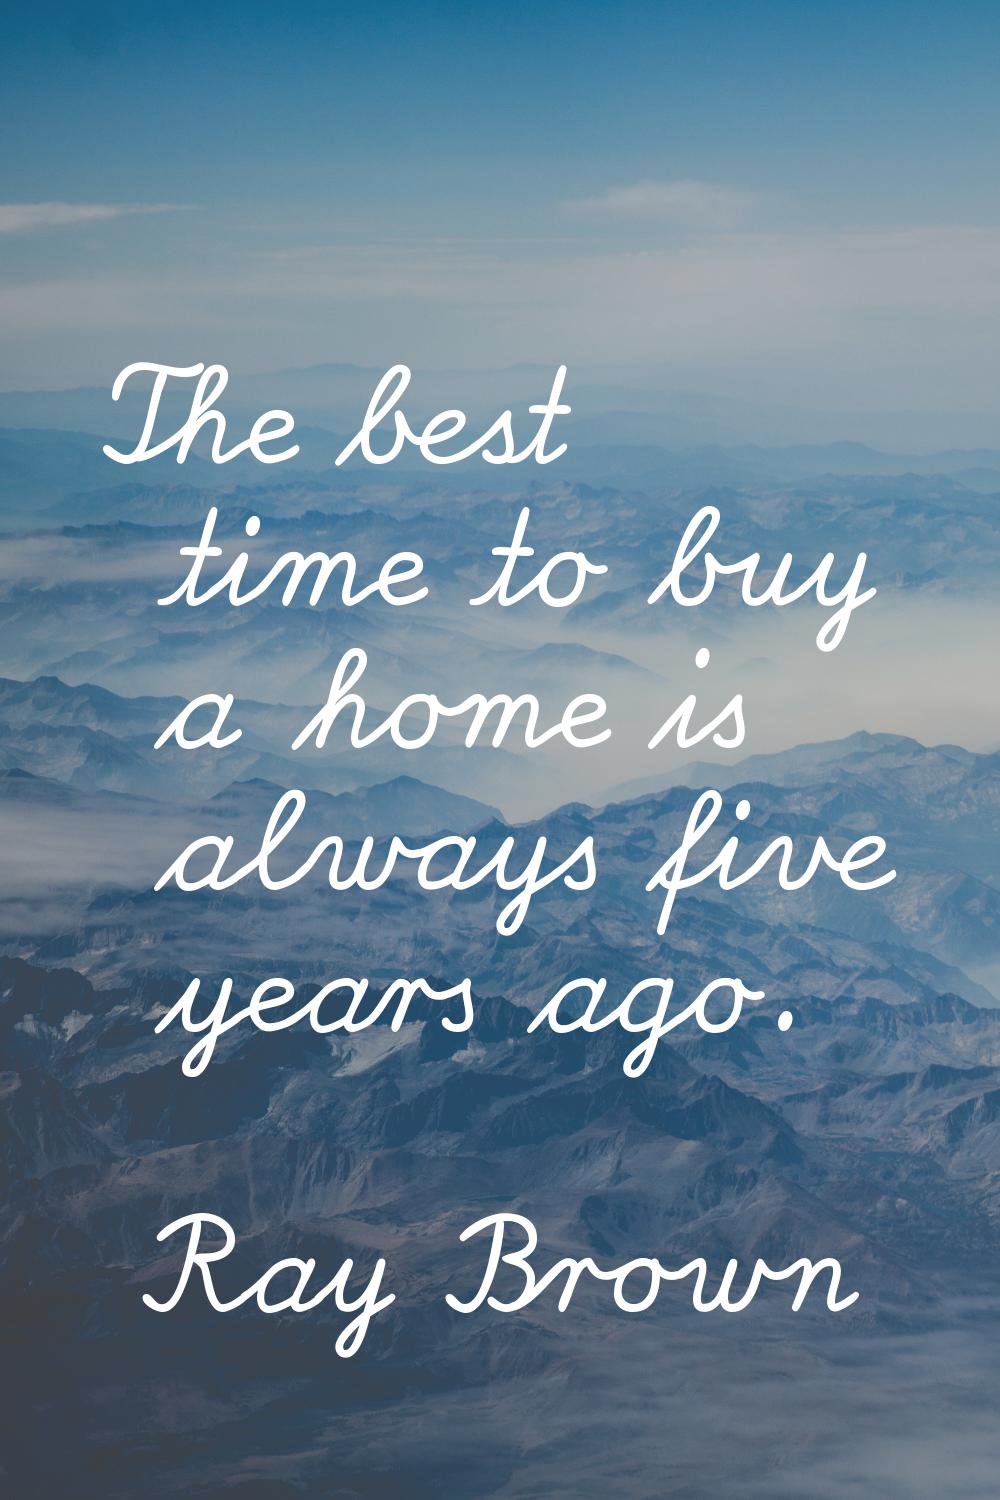 The best time to buy a home is always five years ago.